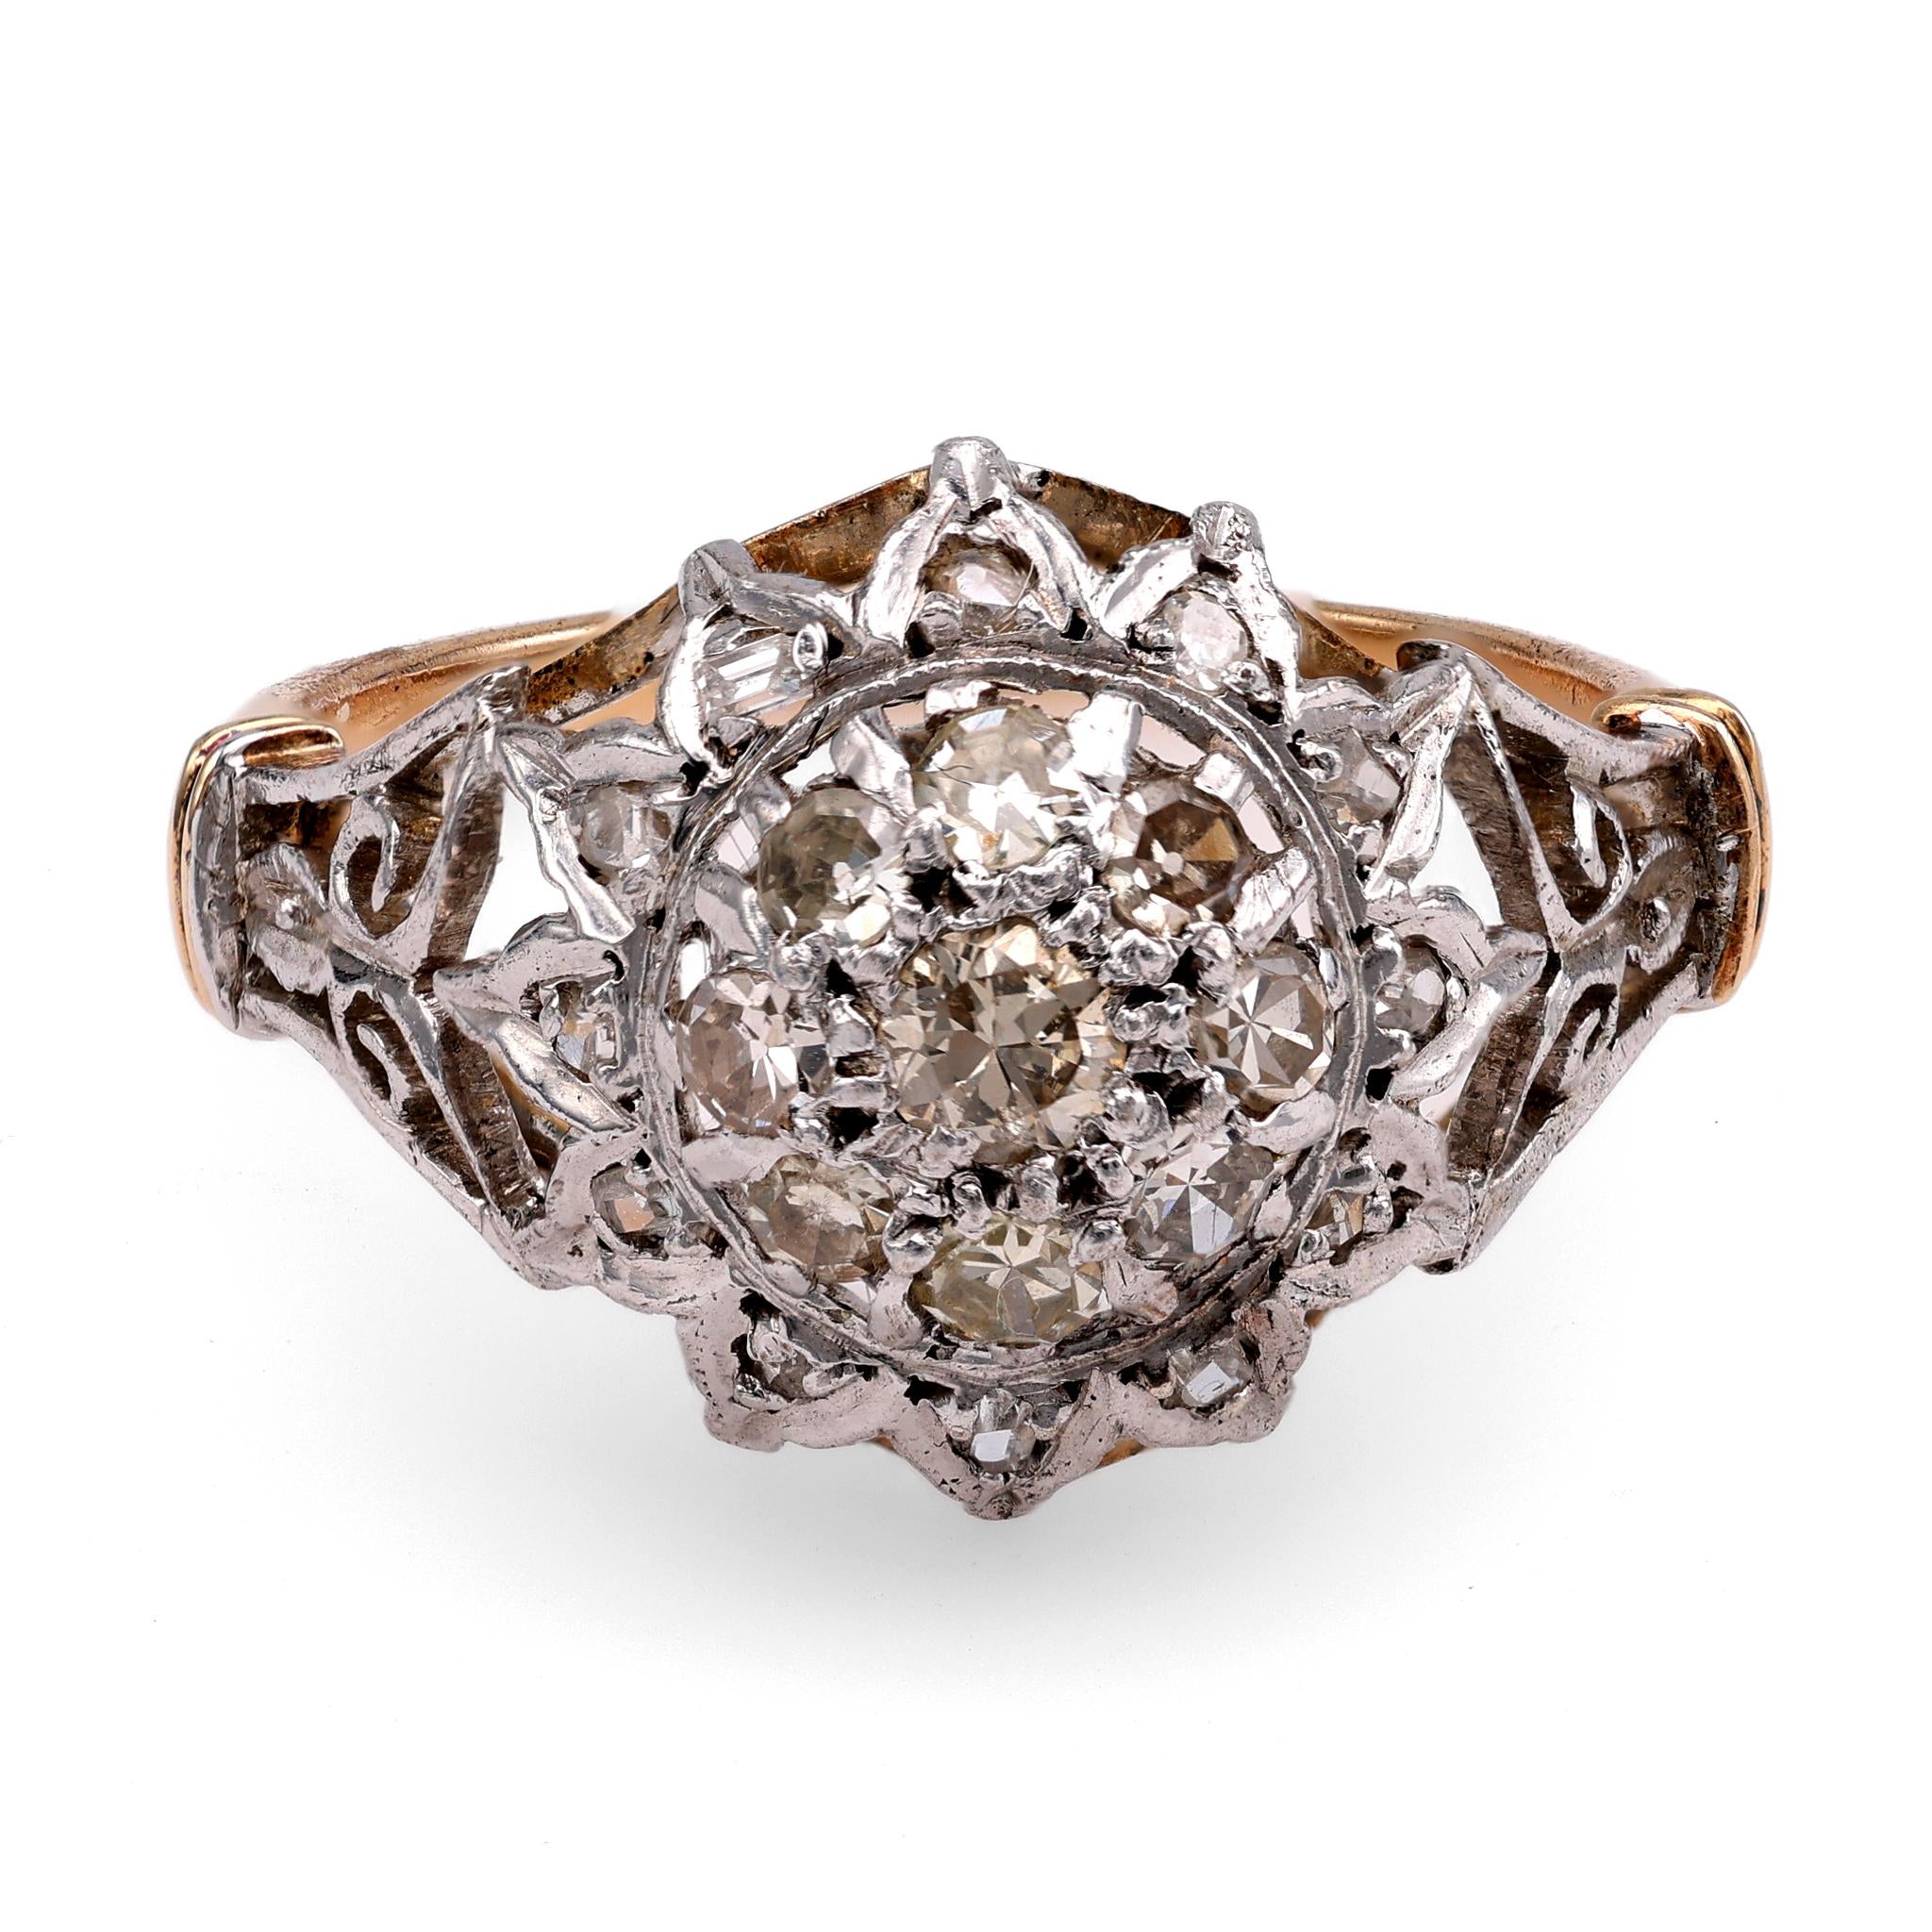 Two-Tone Retro Diamond Cluster Ring  Jack Weir & Sons   